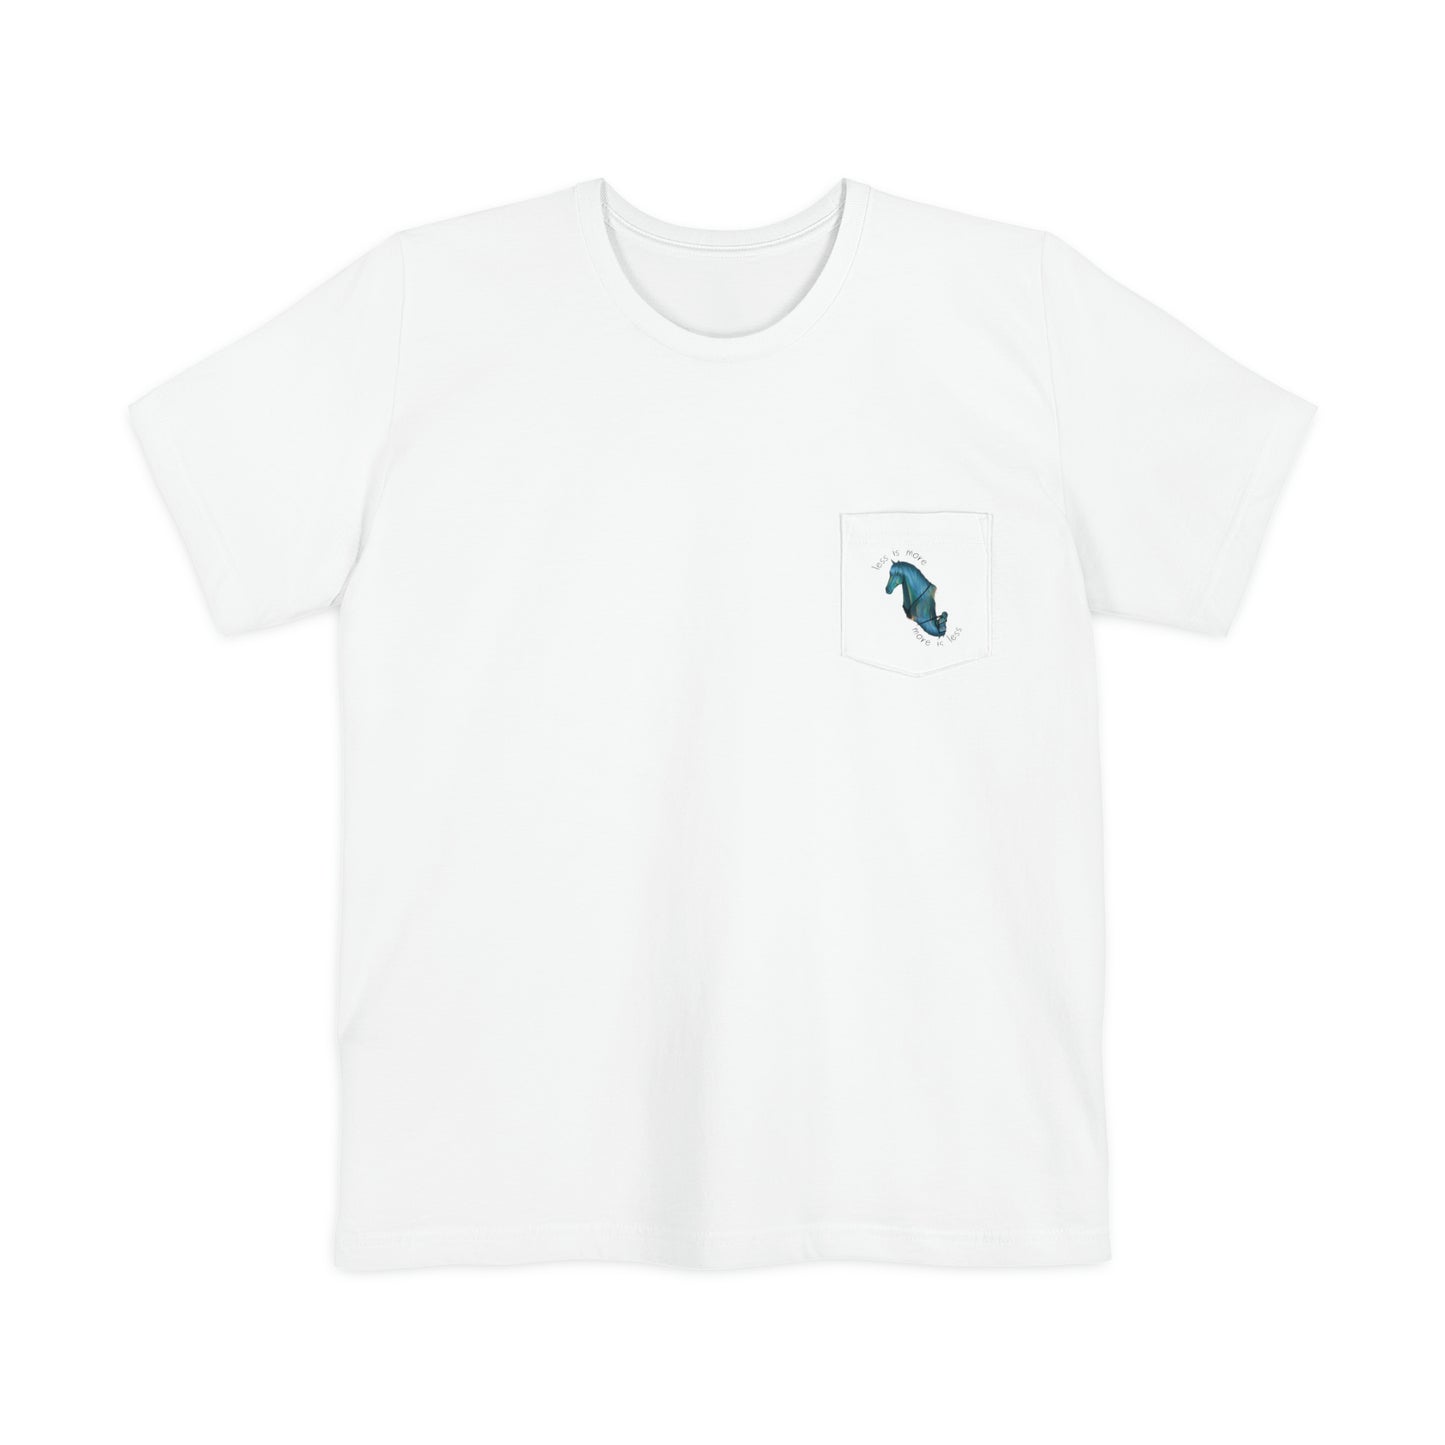 Less is More Pocket T-shirt